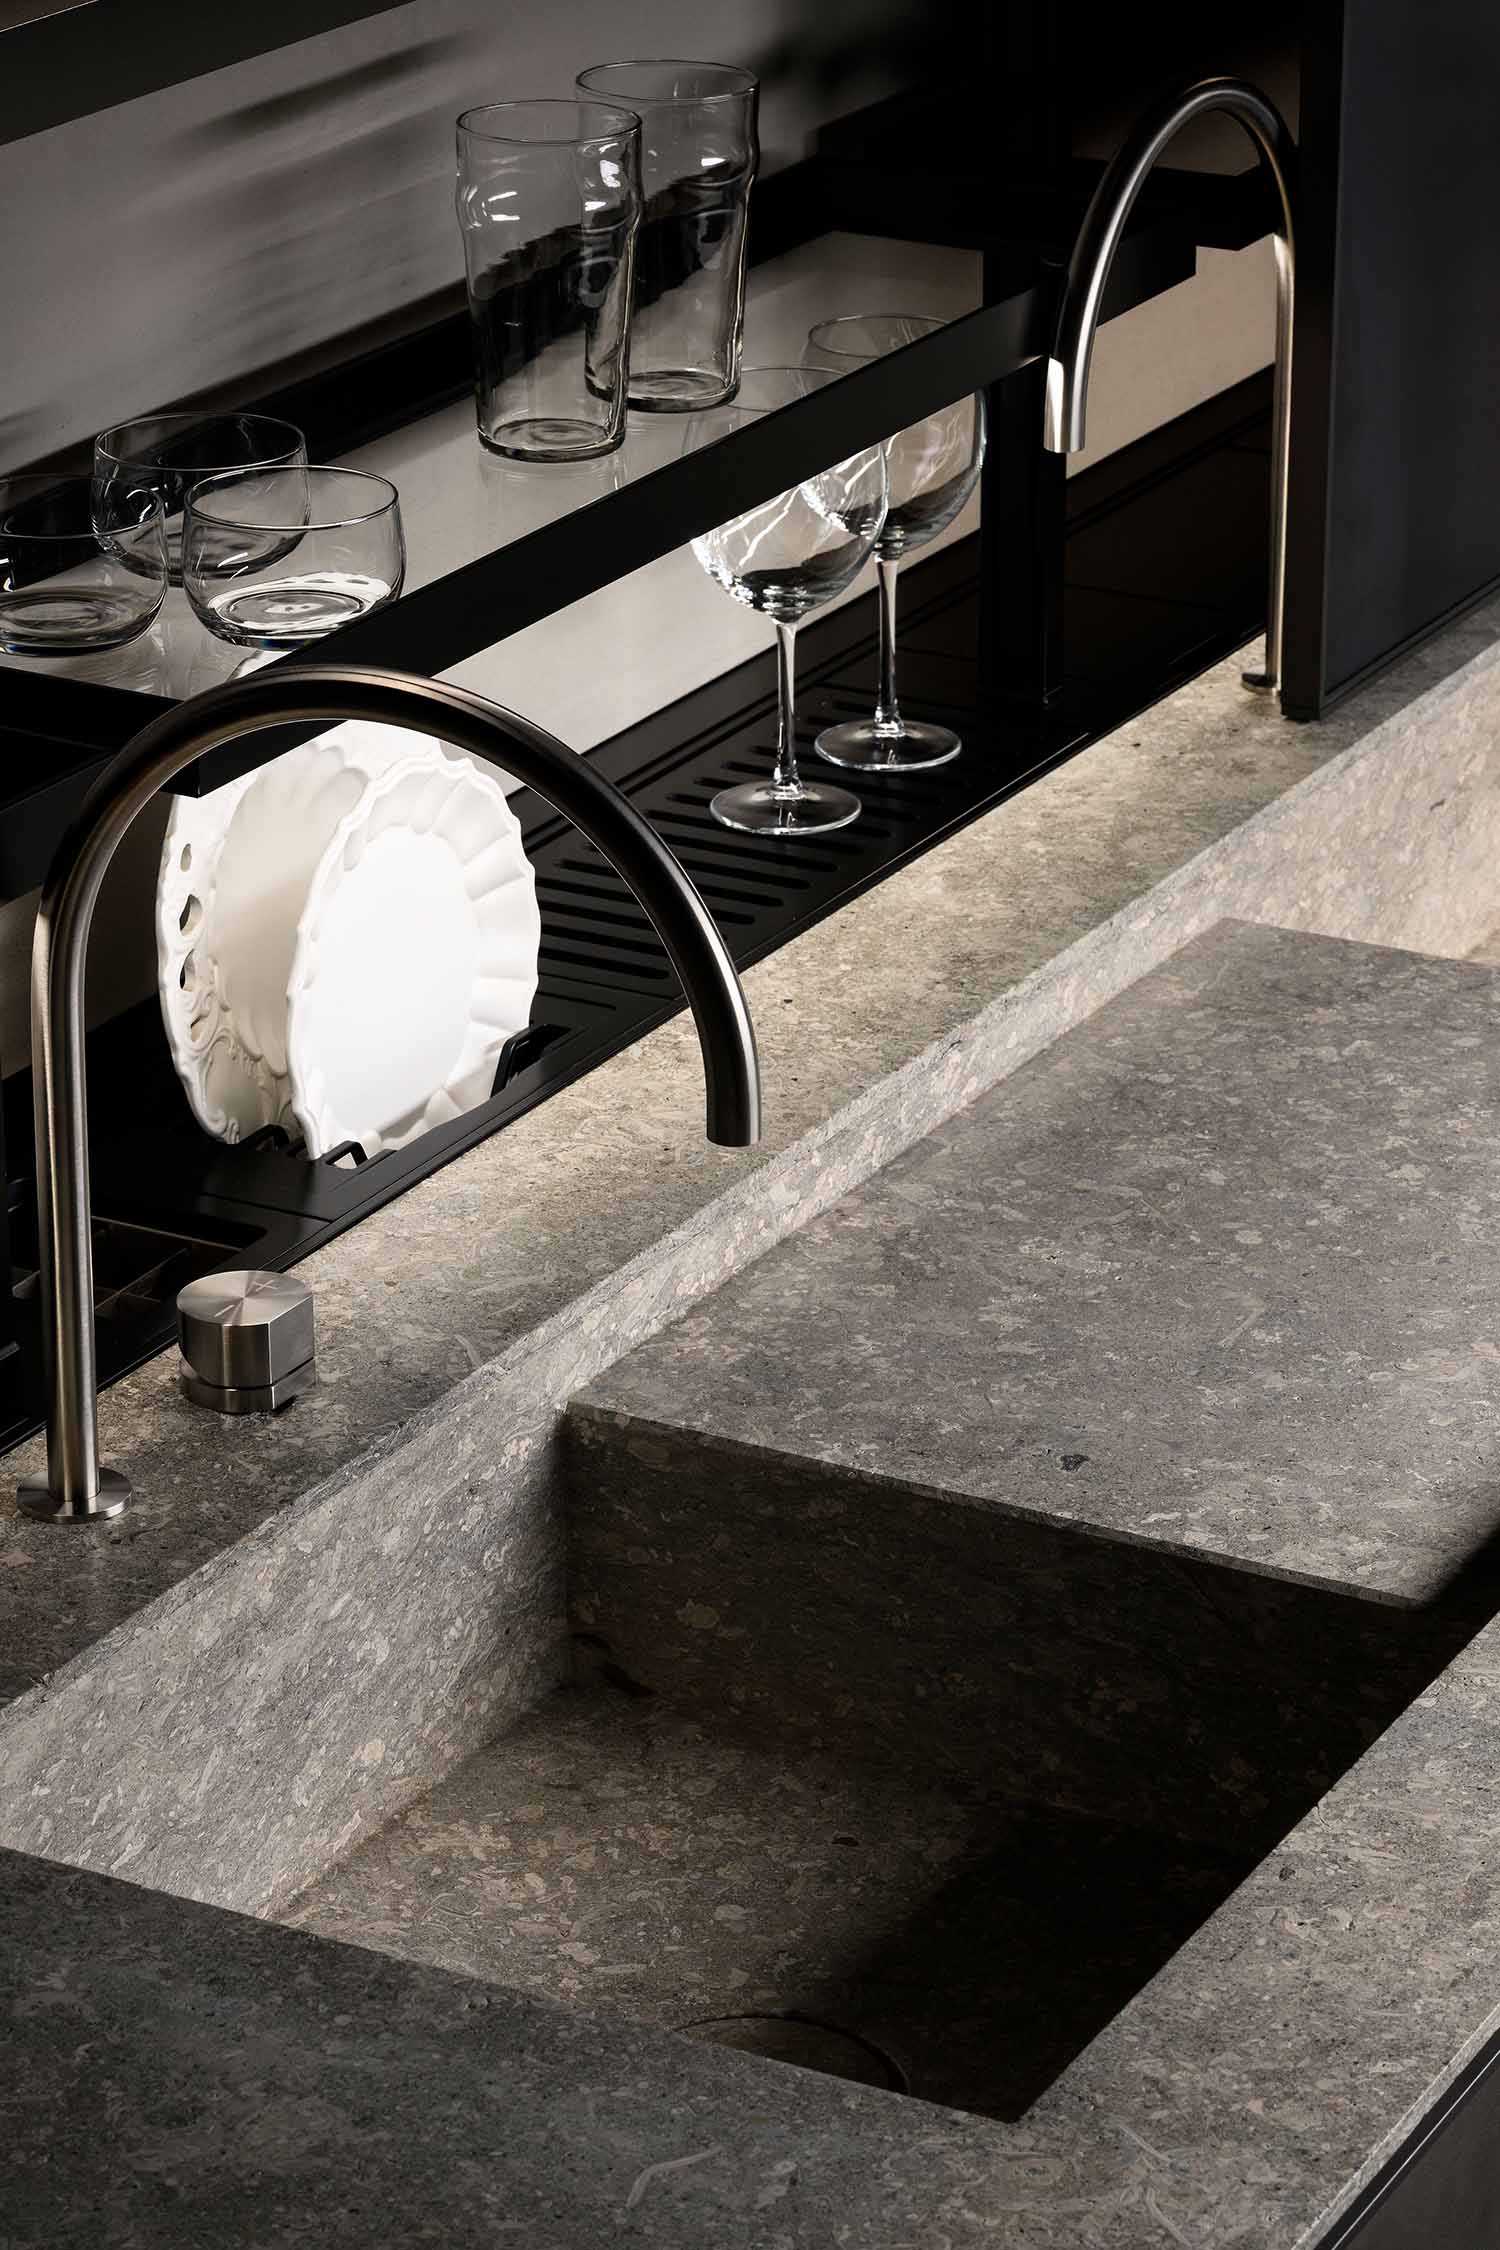 Luxury double sink created with the same Vincenza stone worktop surface.